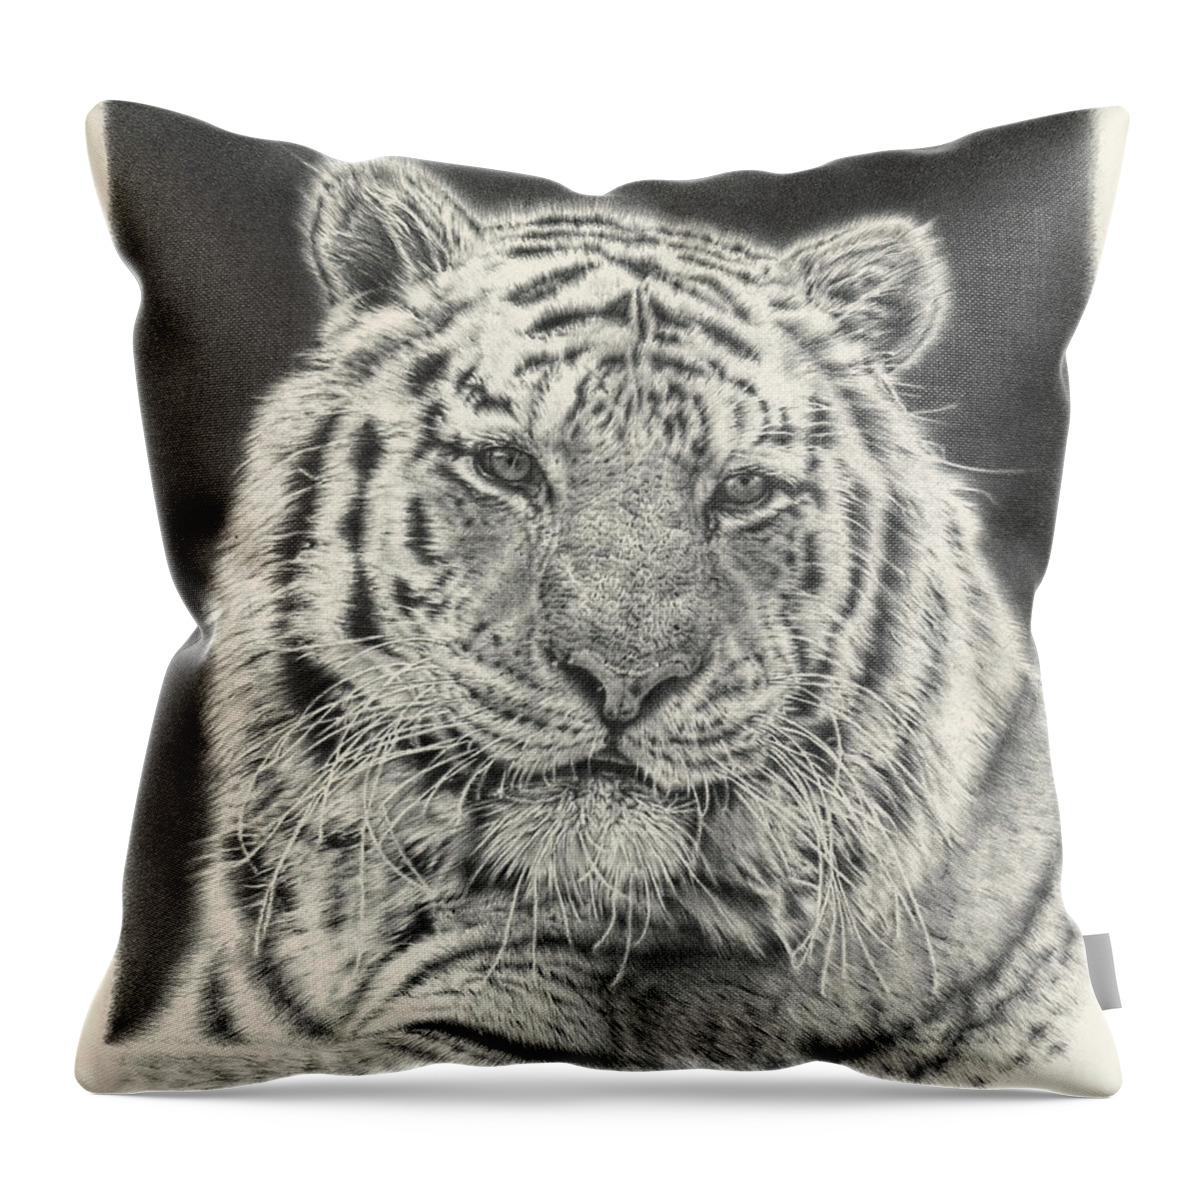 Tiger Throw Pillow featuring the drawing Tiger Drawing by Casey 'Remrov' Vormer